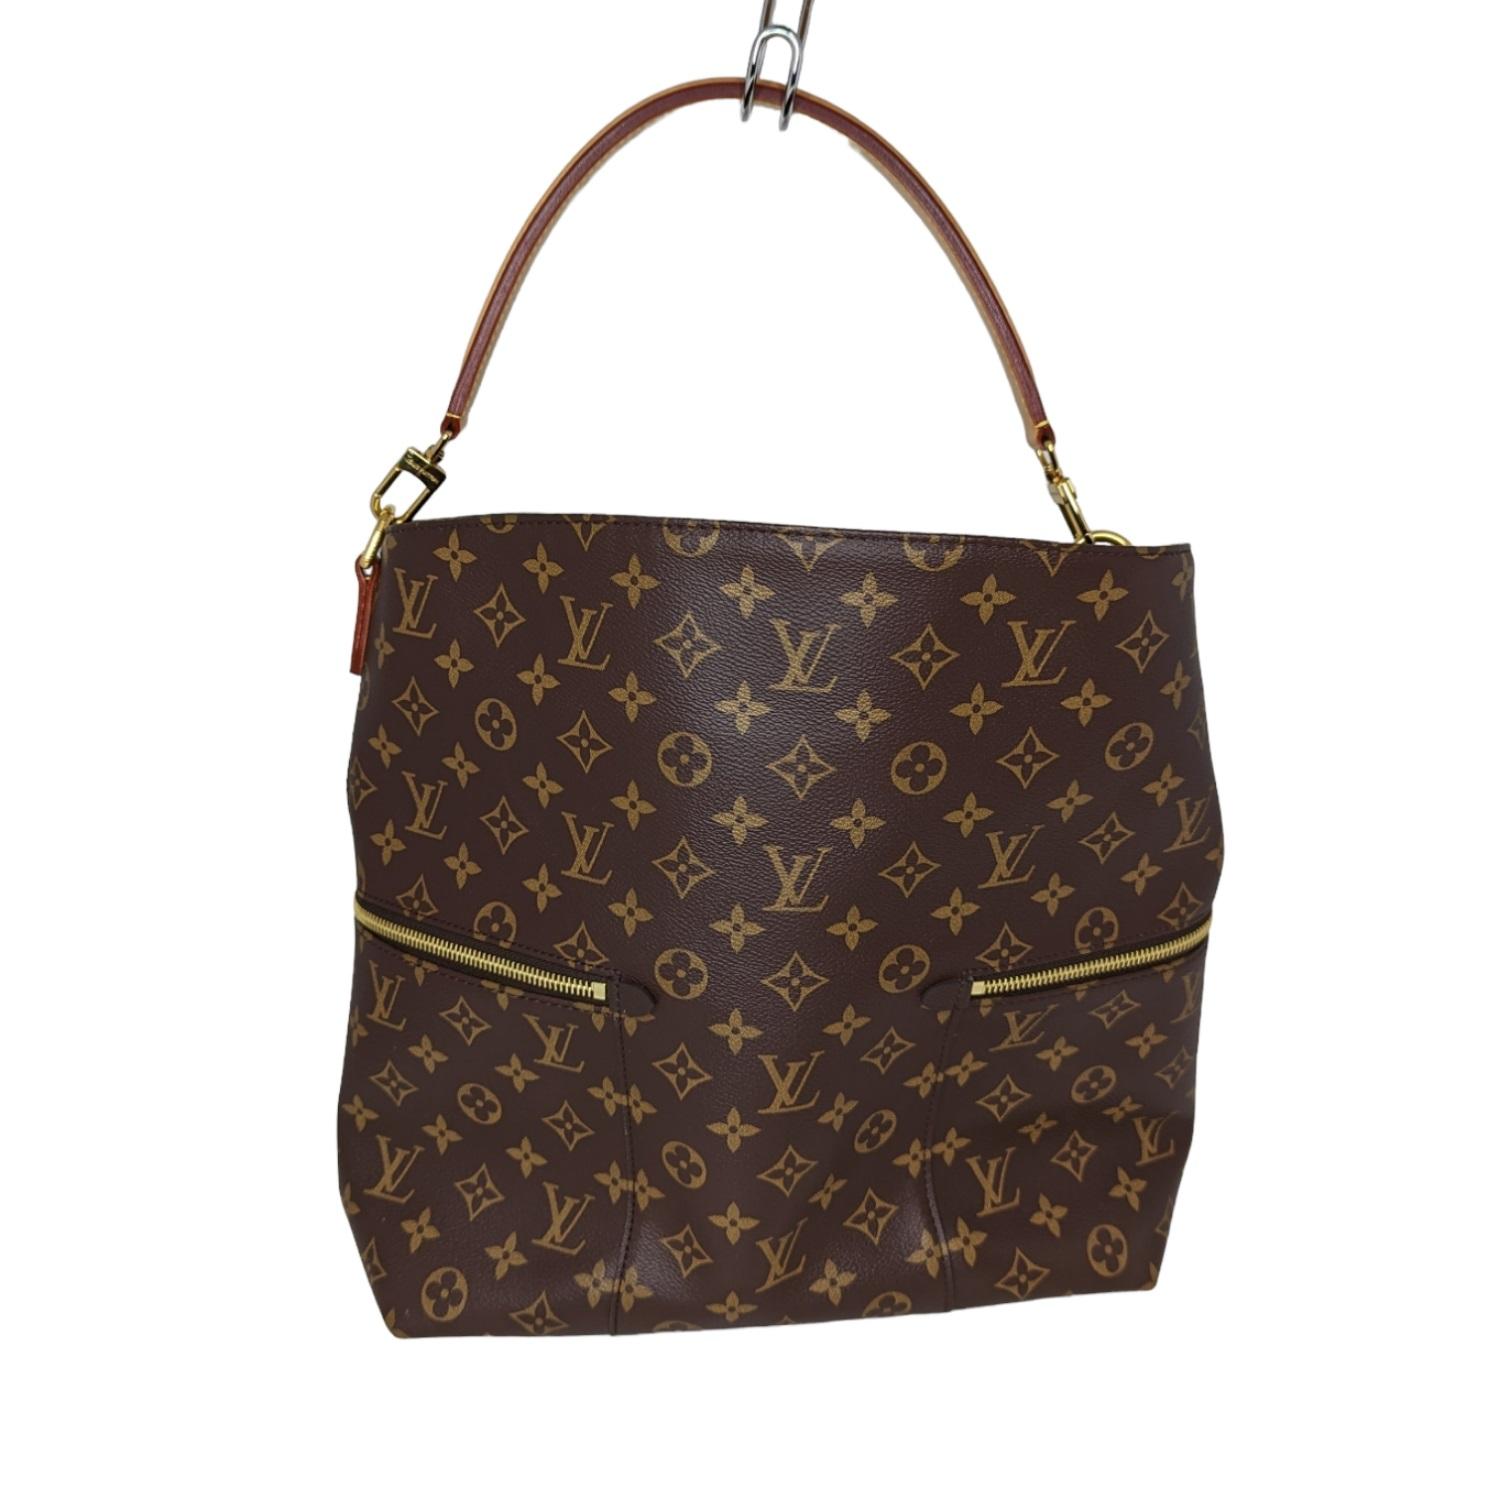 This chic hobo is finely crafted of classic Louis Vuitton monogram coated canvas. The bag features zipper pockets on either side, a vachetta leather top handle and polished brass hardware. The top opens to a microfiber interior with patch pockets.